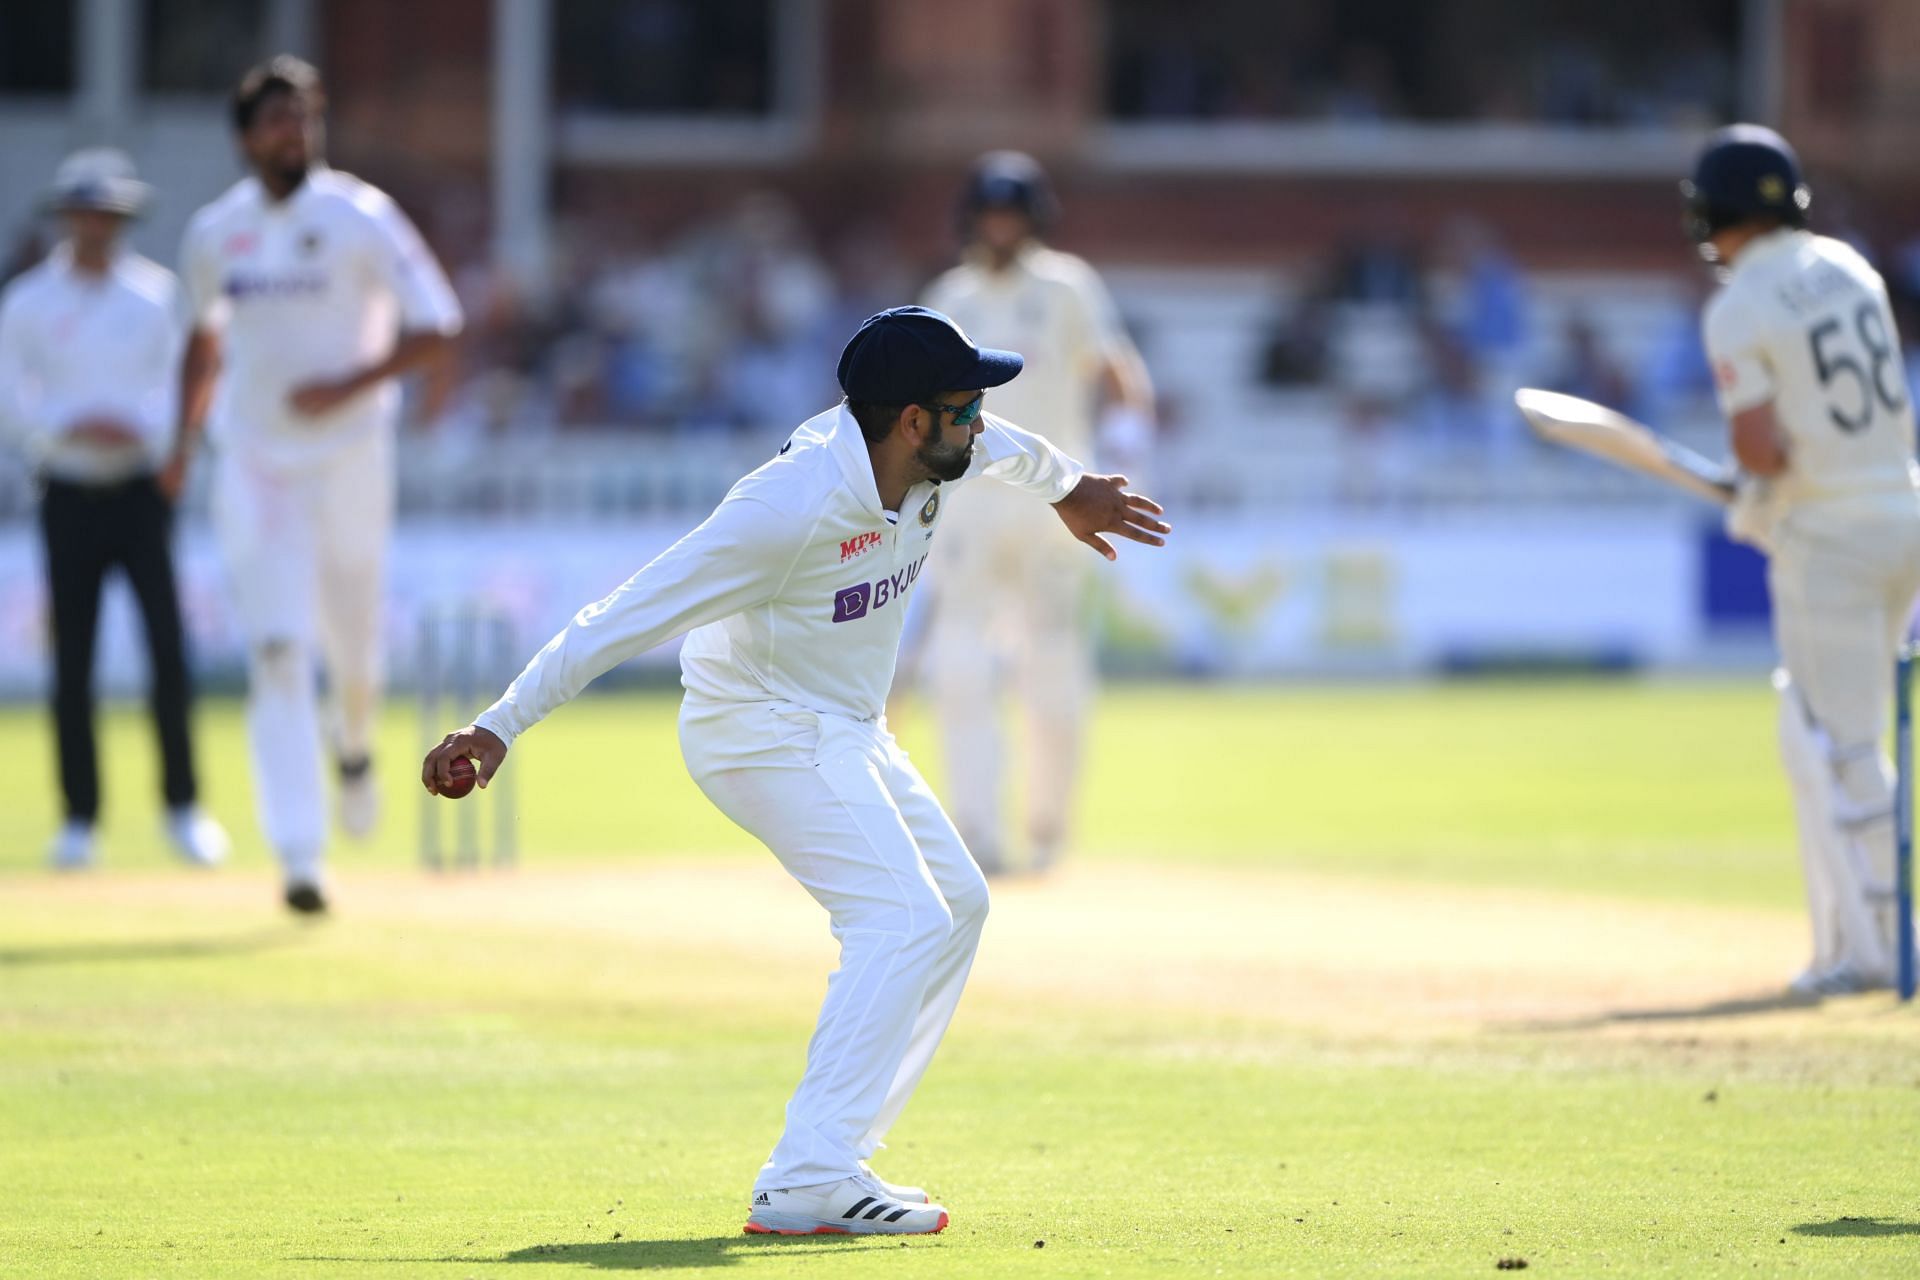 Rohit Sharma celebrates after taking a catch in the slips during the Lord&rsquo;s Test. Pic: Getty Images